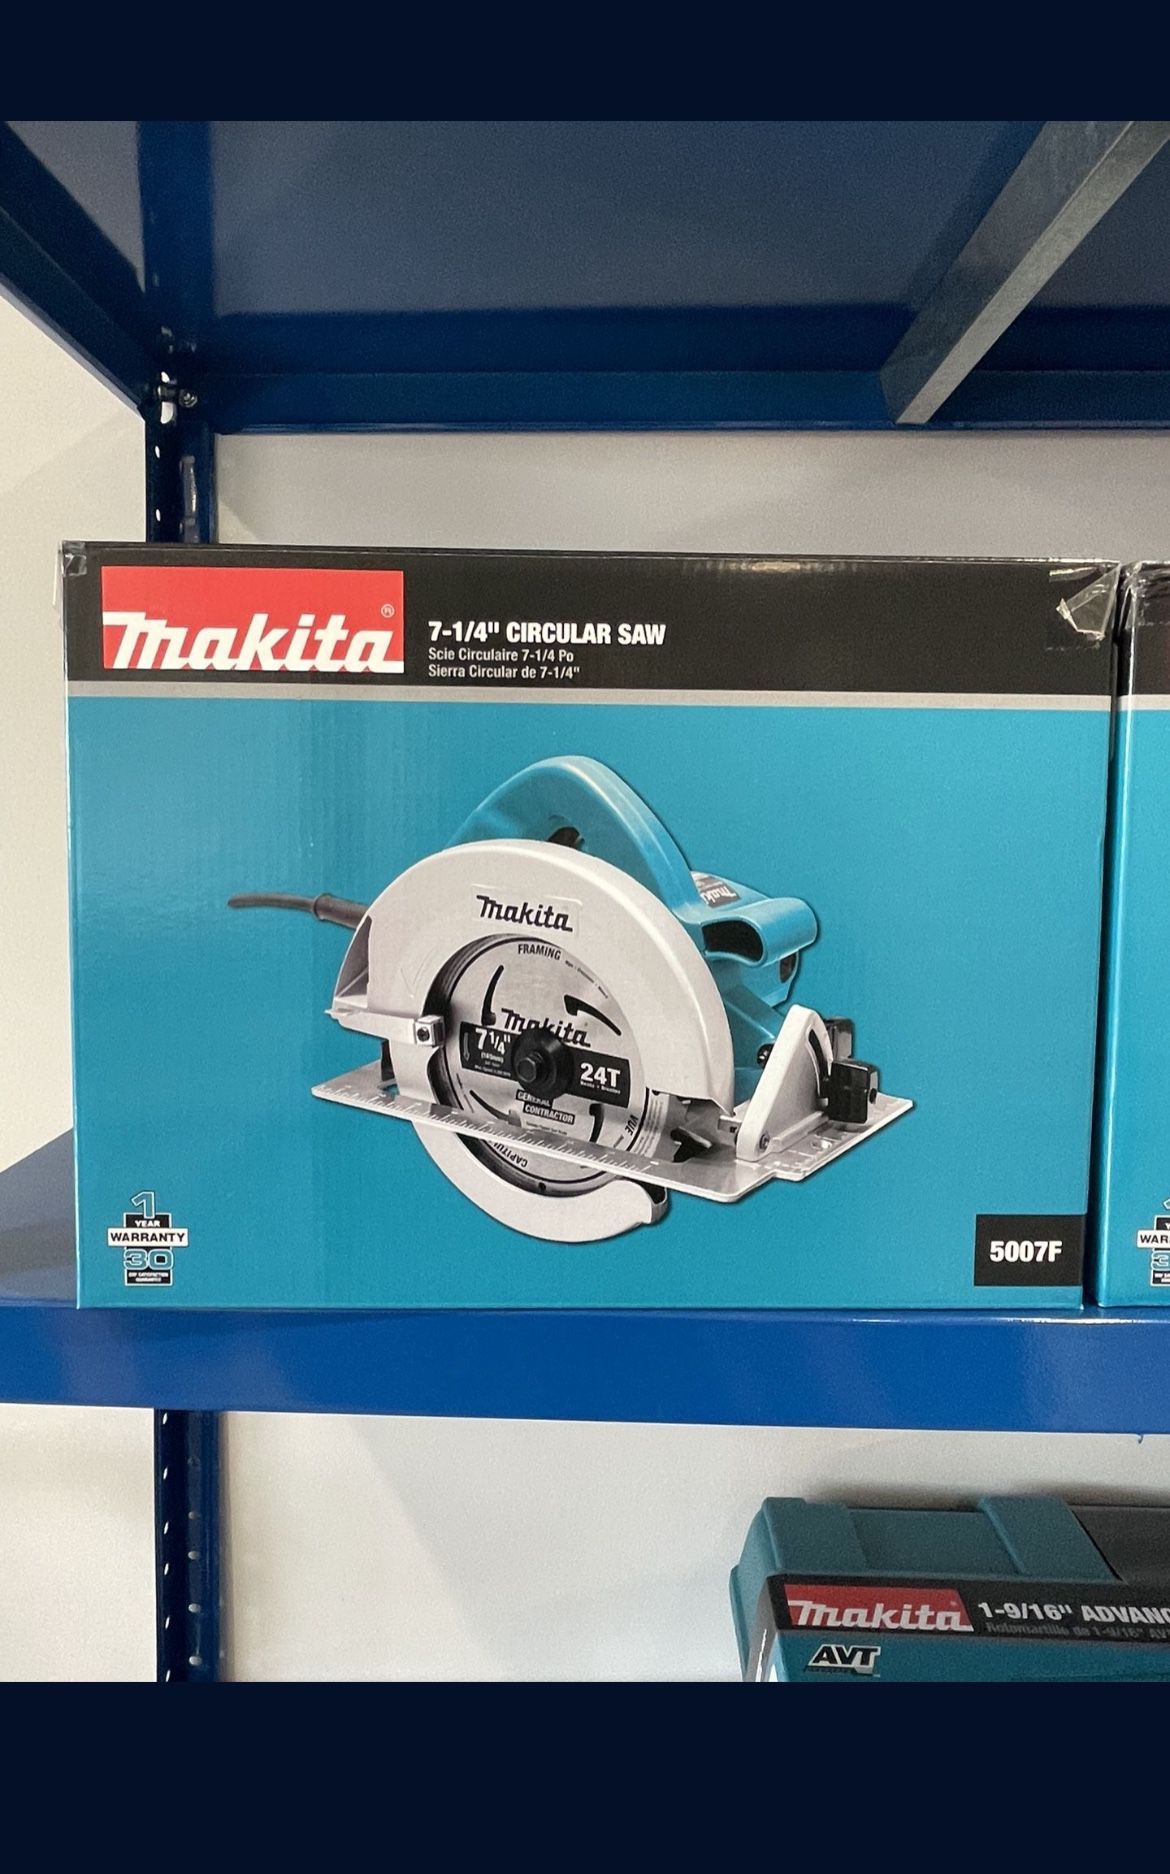 Makita 5007F 1/4” Circular Saw for Sale in Houston, TX OfferUp